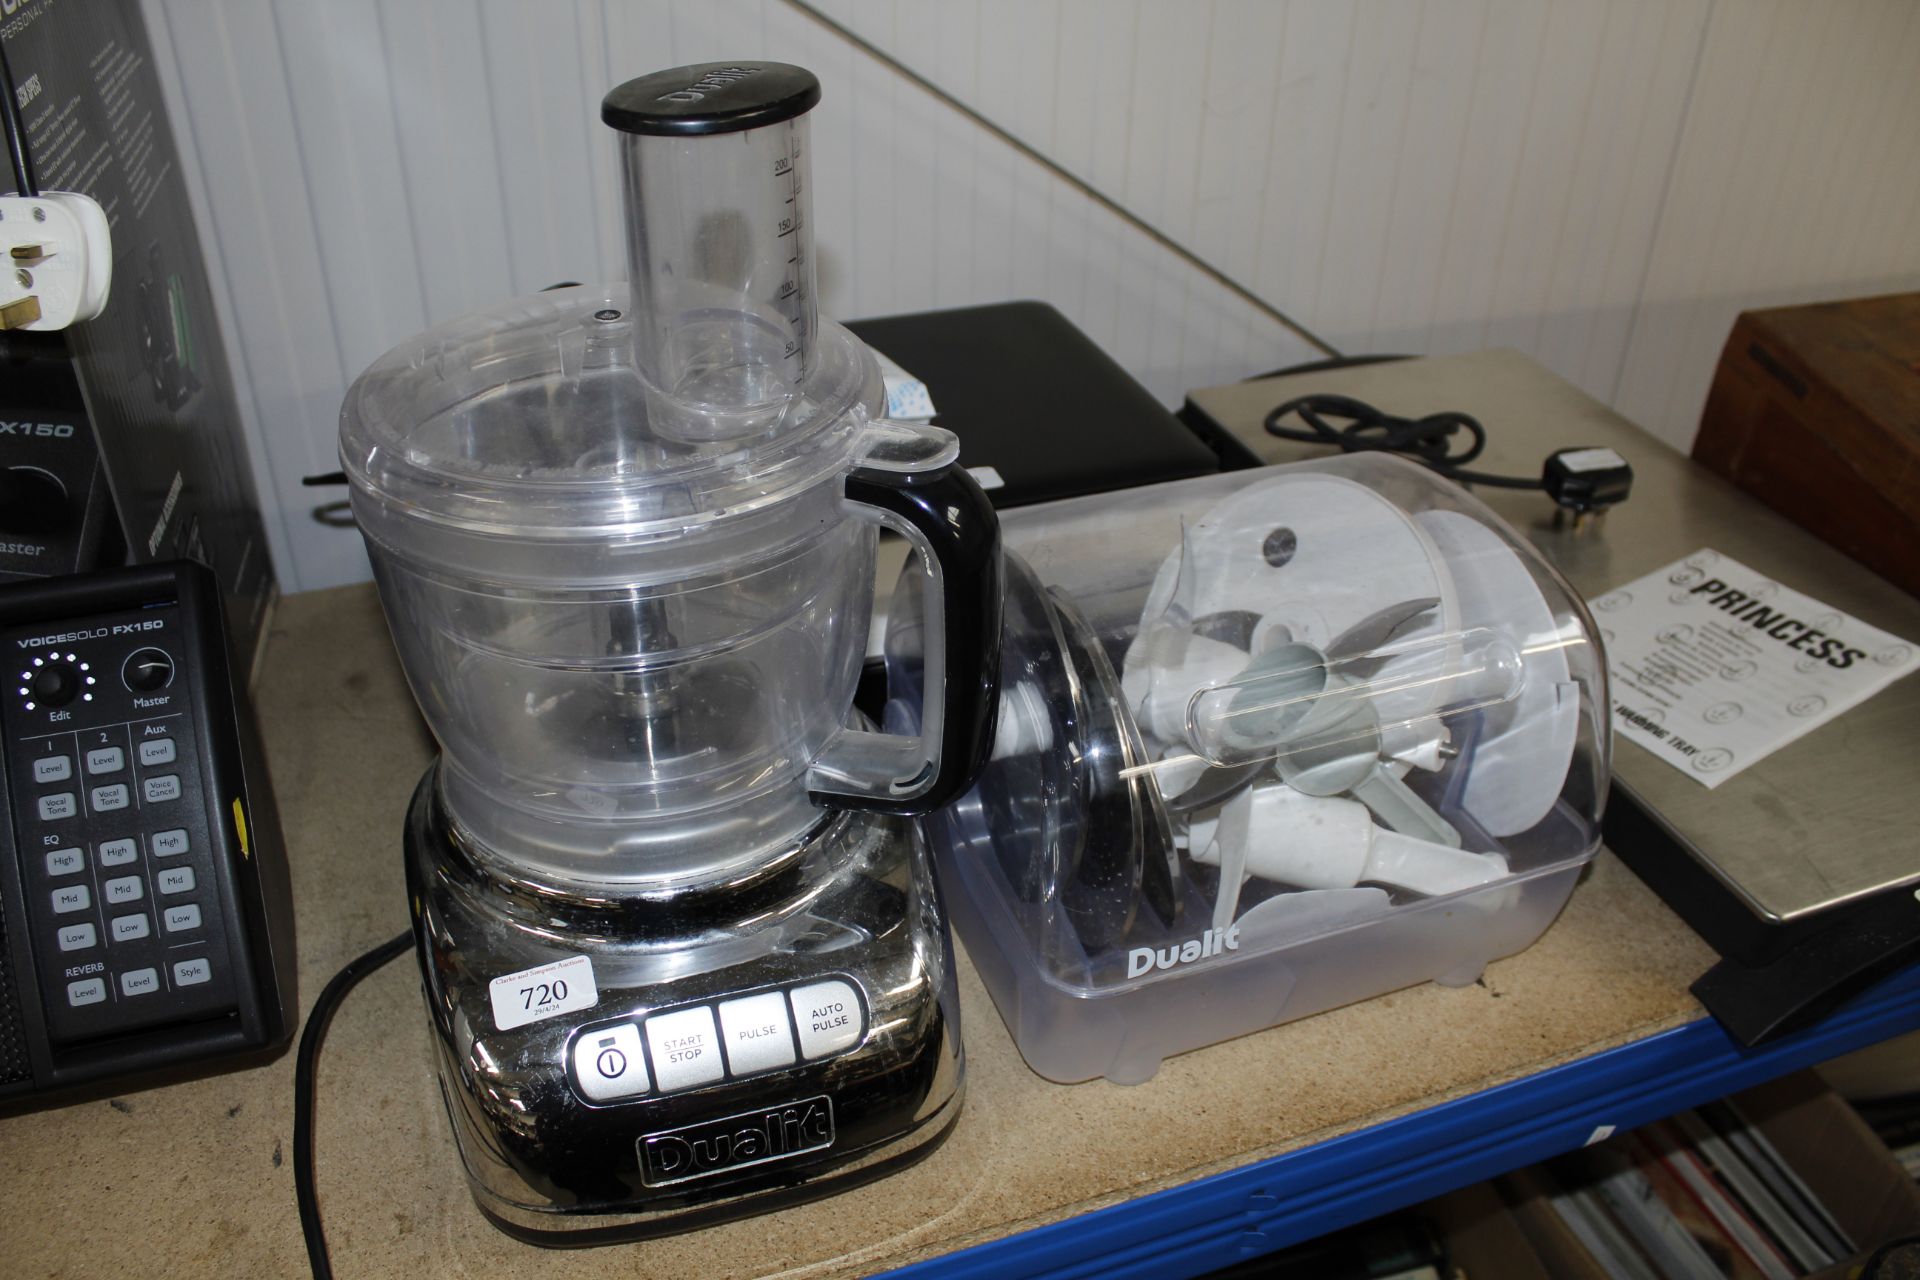 A Dualit food processor with the attachments